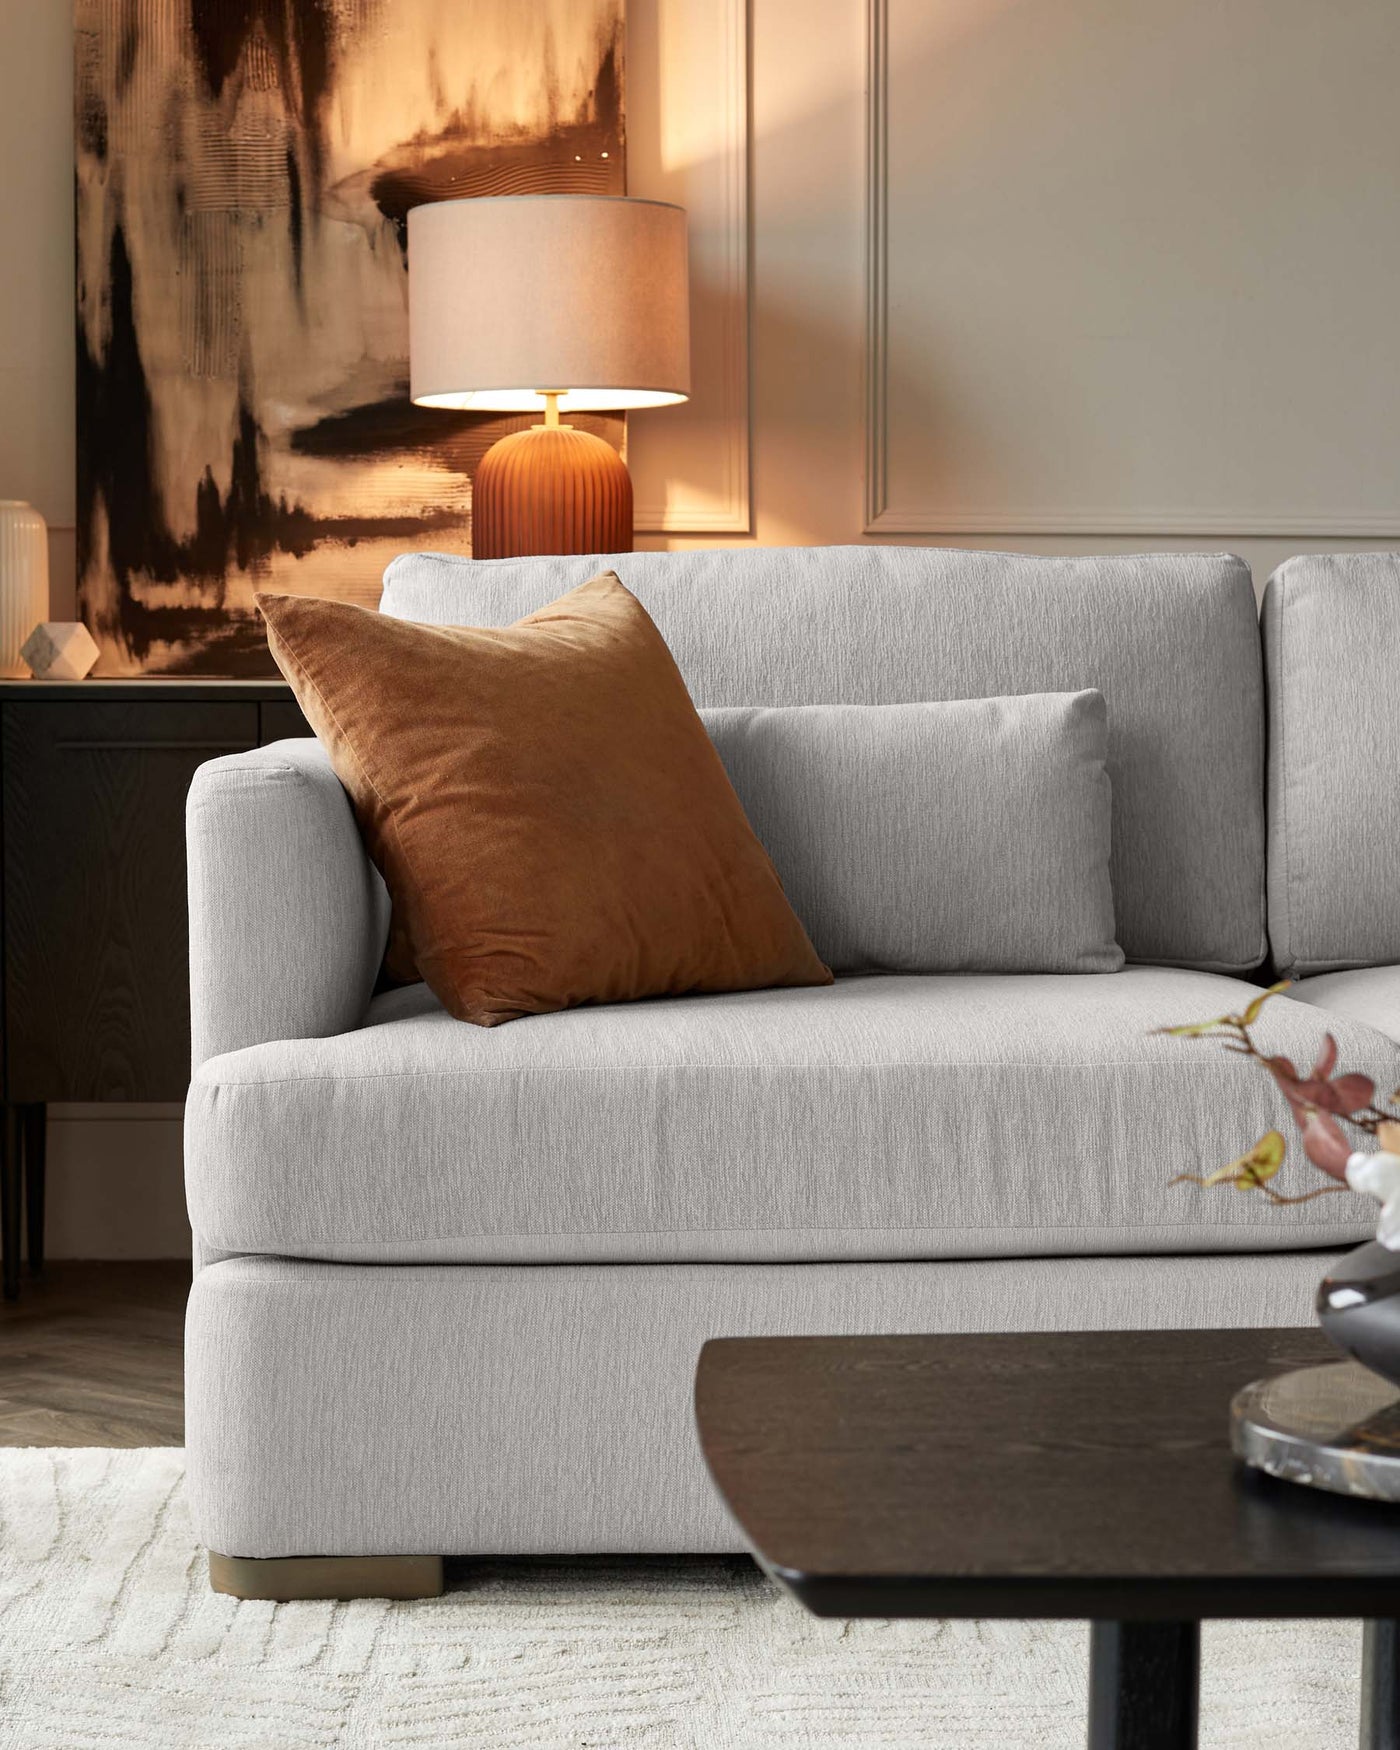 Contemporary living room furniture displayed, featuring a light grey fabric upholstered sofa with plush cushions and one brown accent pillow. A dark wood oval-shaped coffee table is positioned in the foreground. The scene is complemented by an abstract painting, a modern table lamp with a cylindrical shade atop a terracotta base, and a white textured rug underneath. The furniture exudes a warm and inviting ambiance.